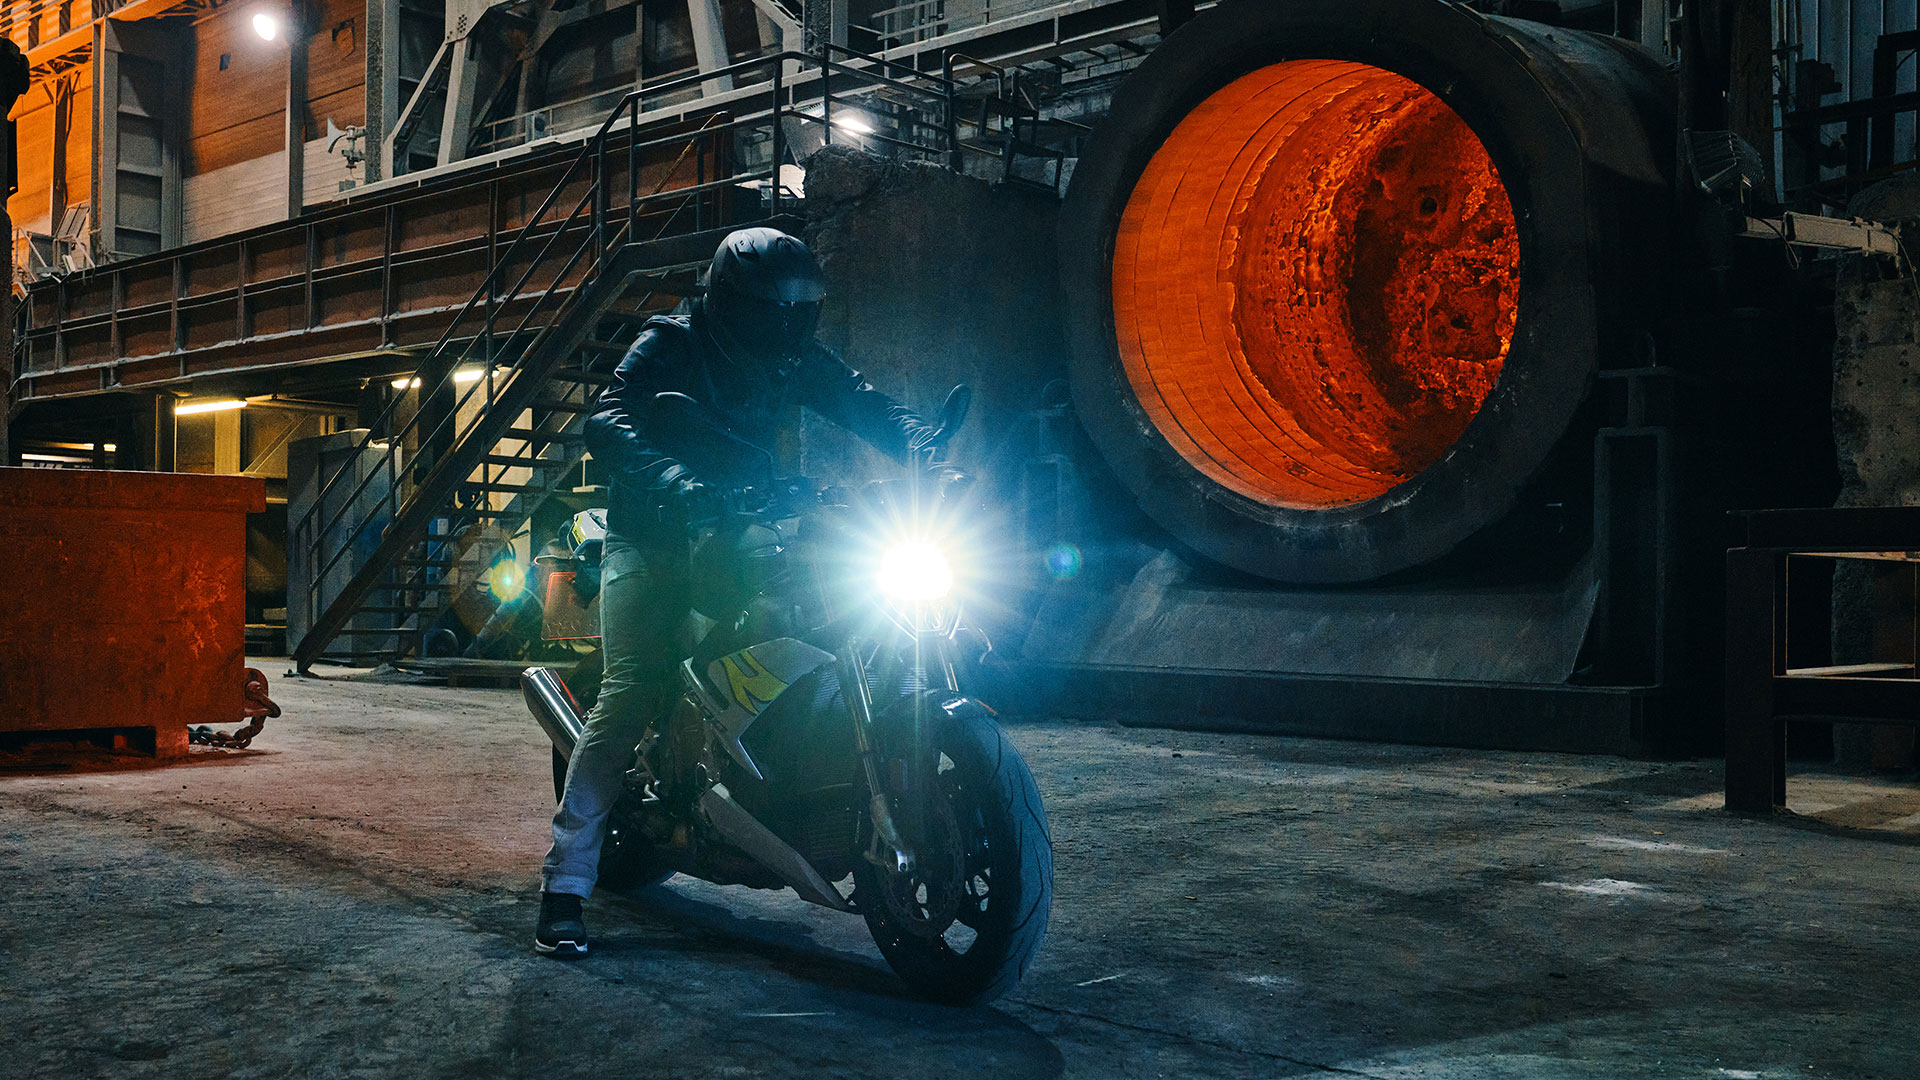 We see the S 1000 R in front of a red-hot steel boiler.